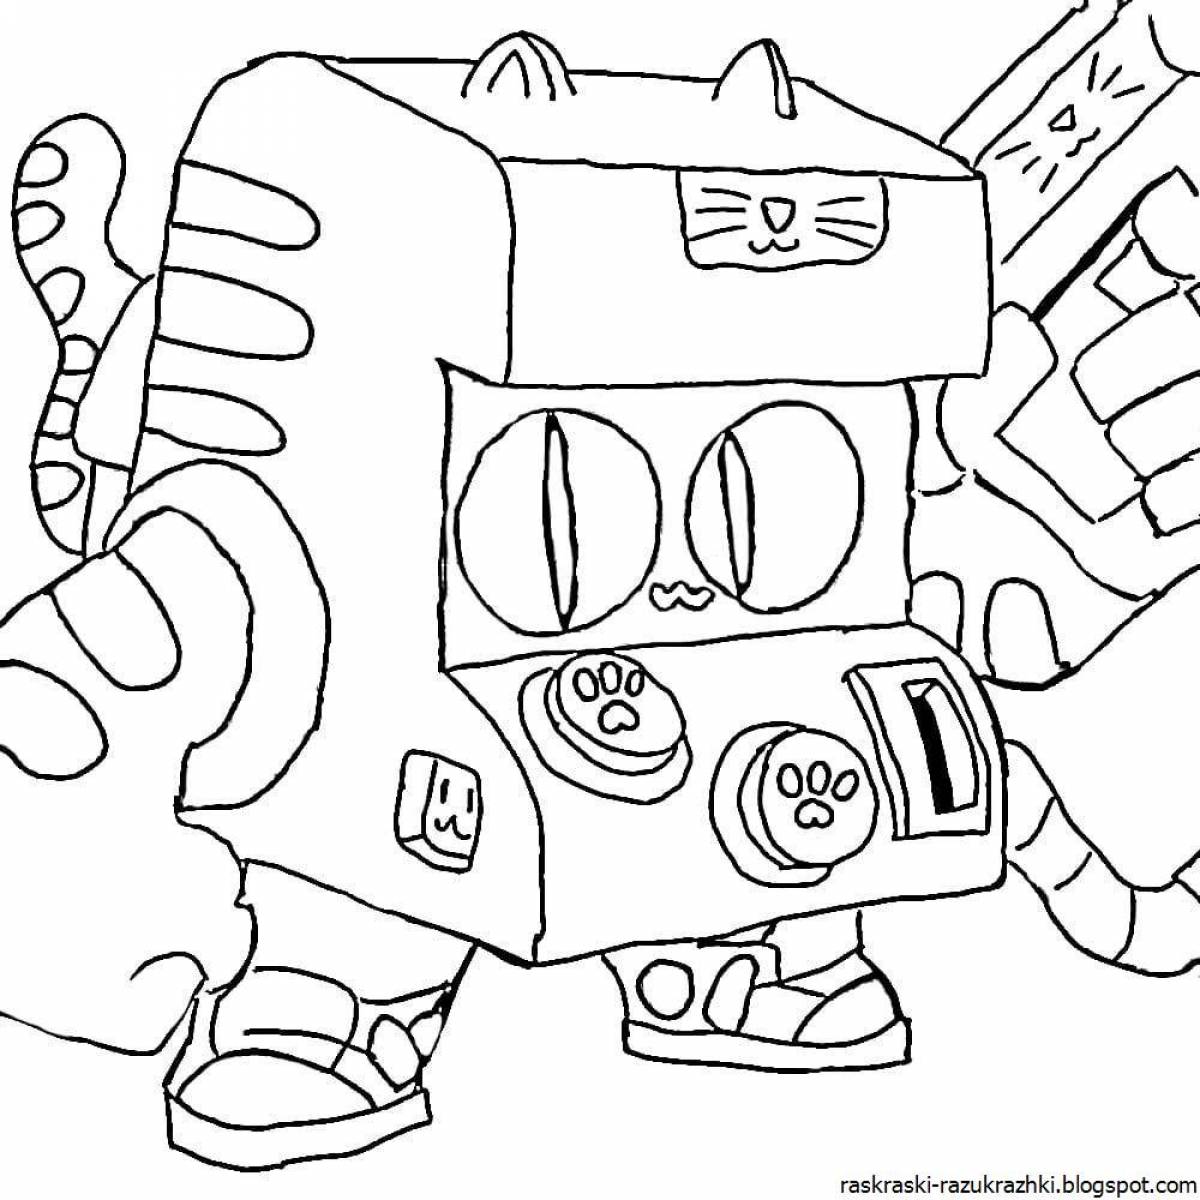 Cute bravo stars coloring pages for boys